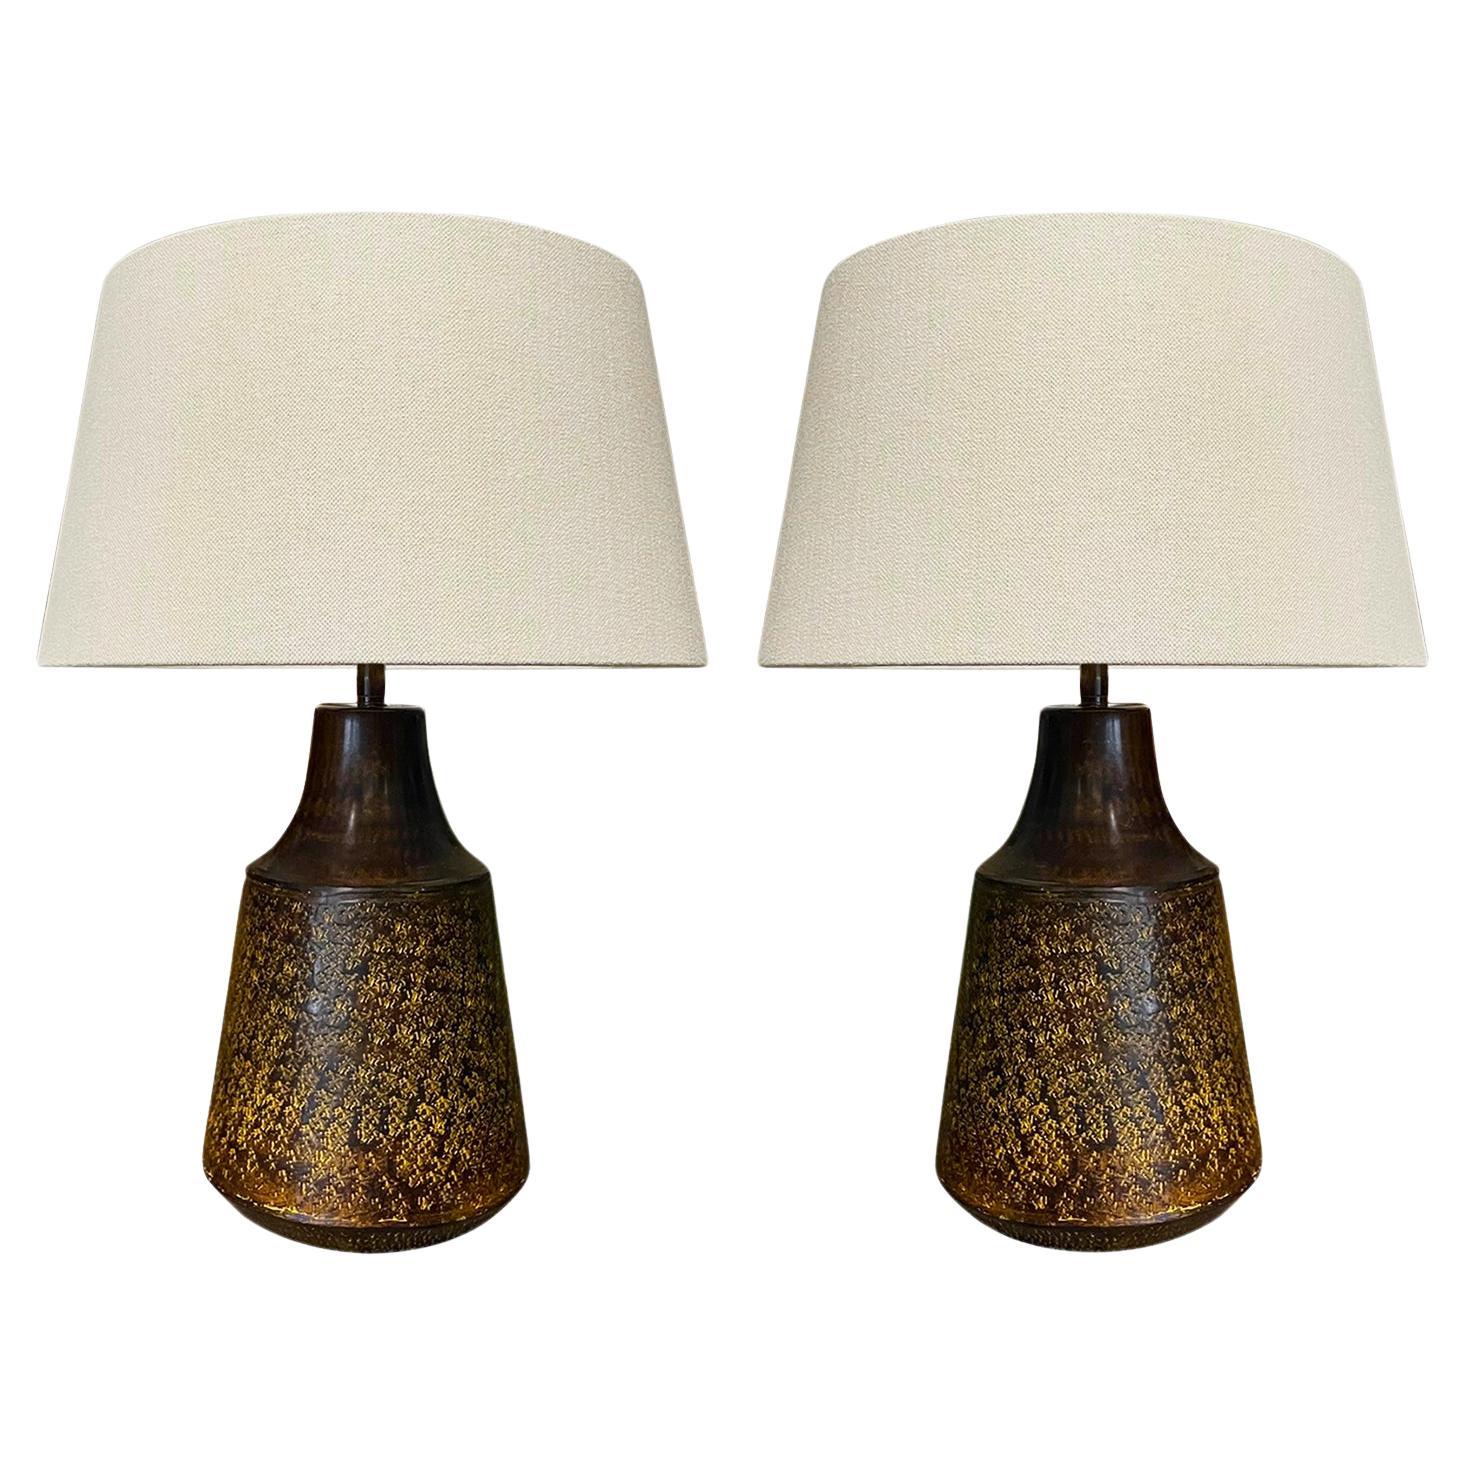 Gold And Brown Textured Metal Pair Table Lamps With Shades, Indonesia For Sale